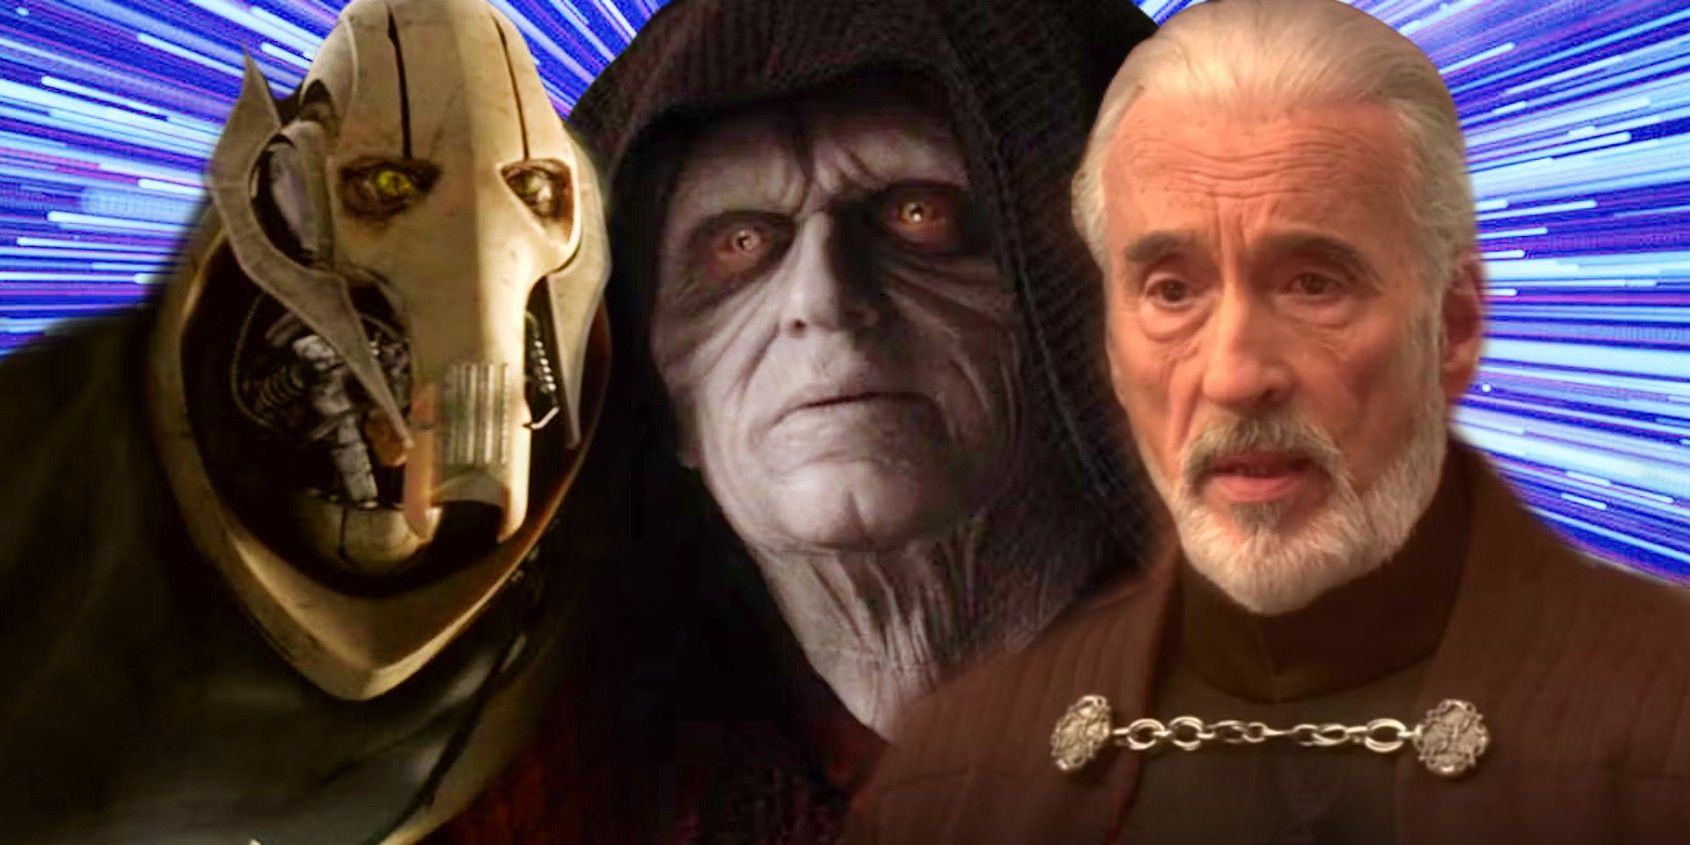 General Grievous, Darth Sidious, and Count Dooku in Star Wars: Episode III - Revenge of the Sith set against a blue hyperspace background